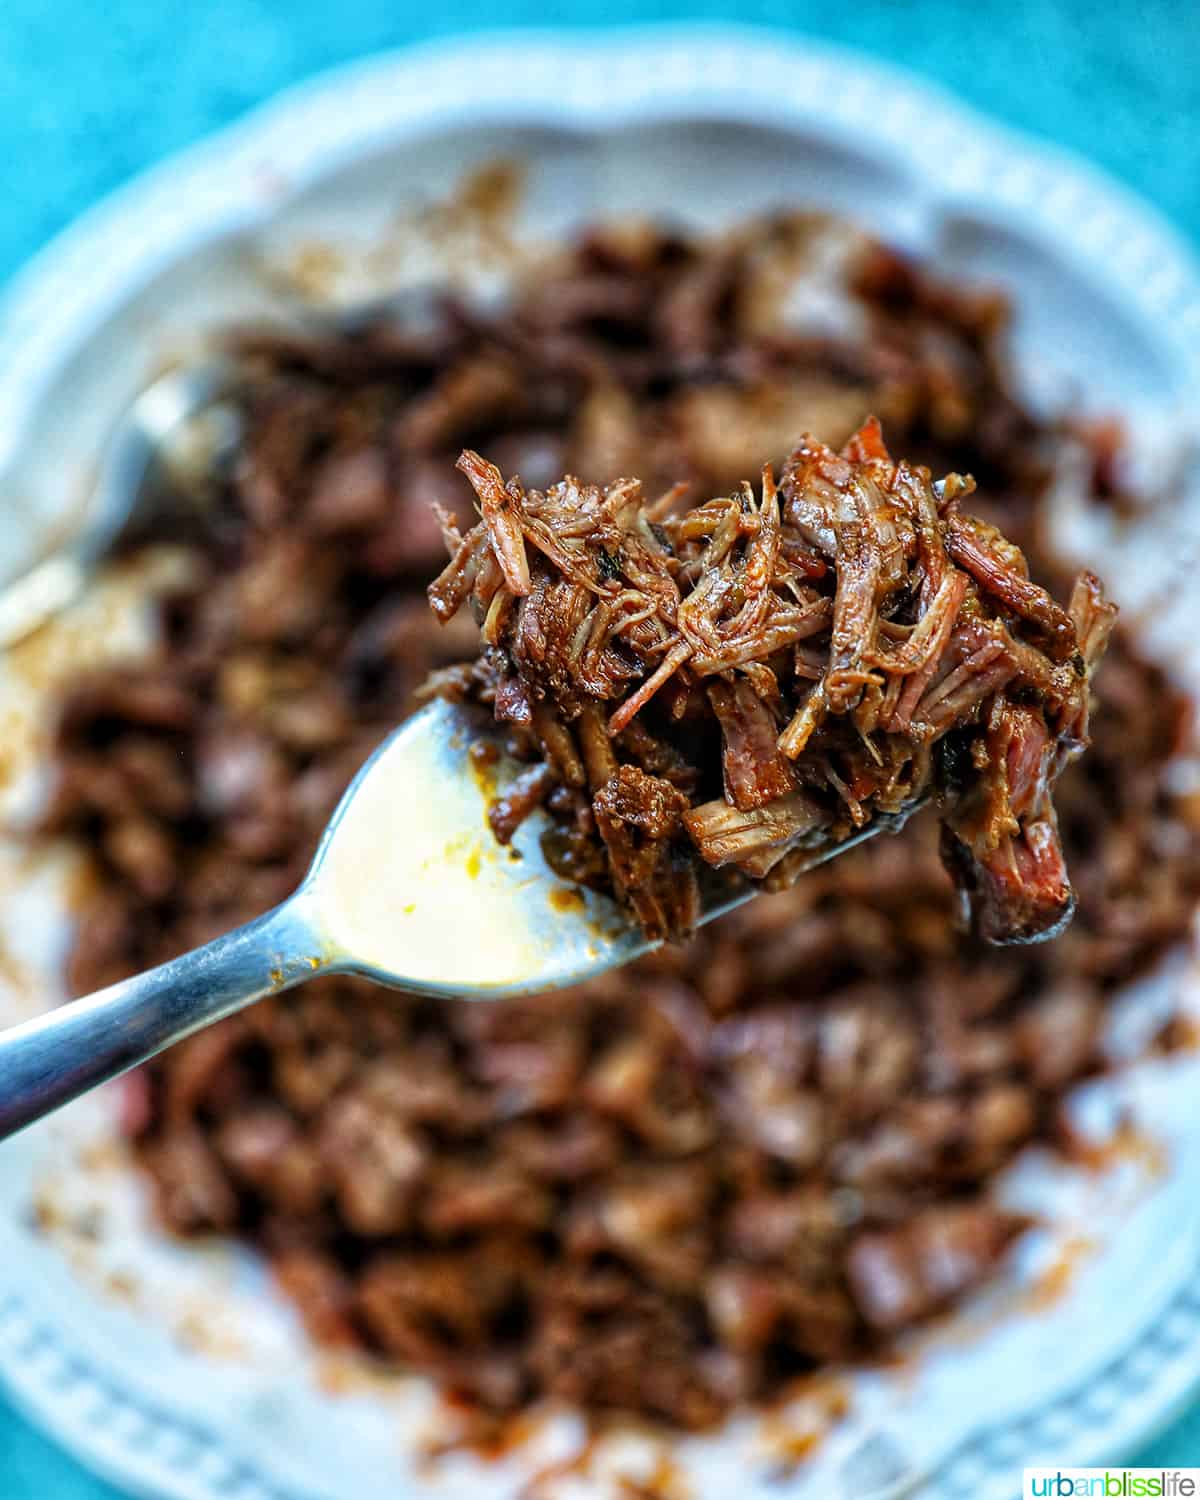 forkful of Mexican shredded beef above a bowl of shredded beef.